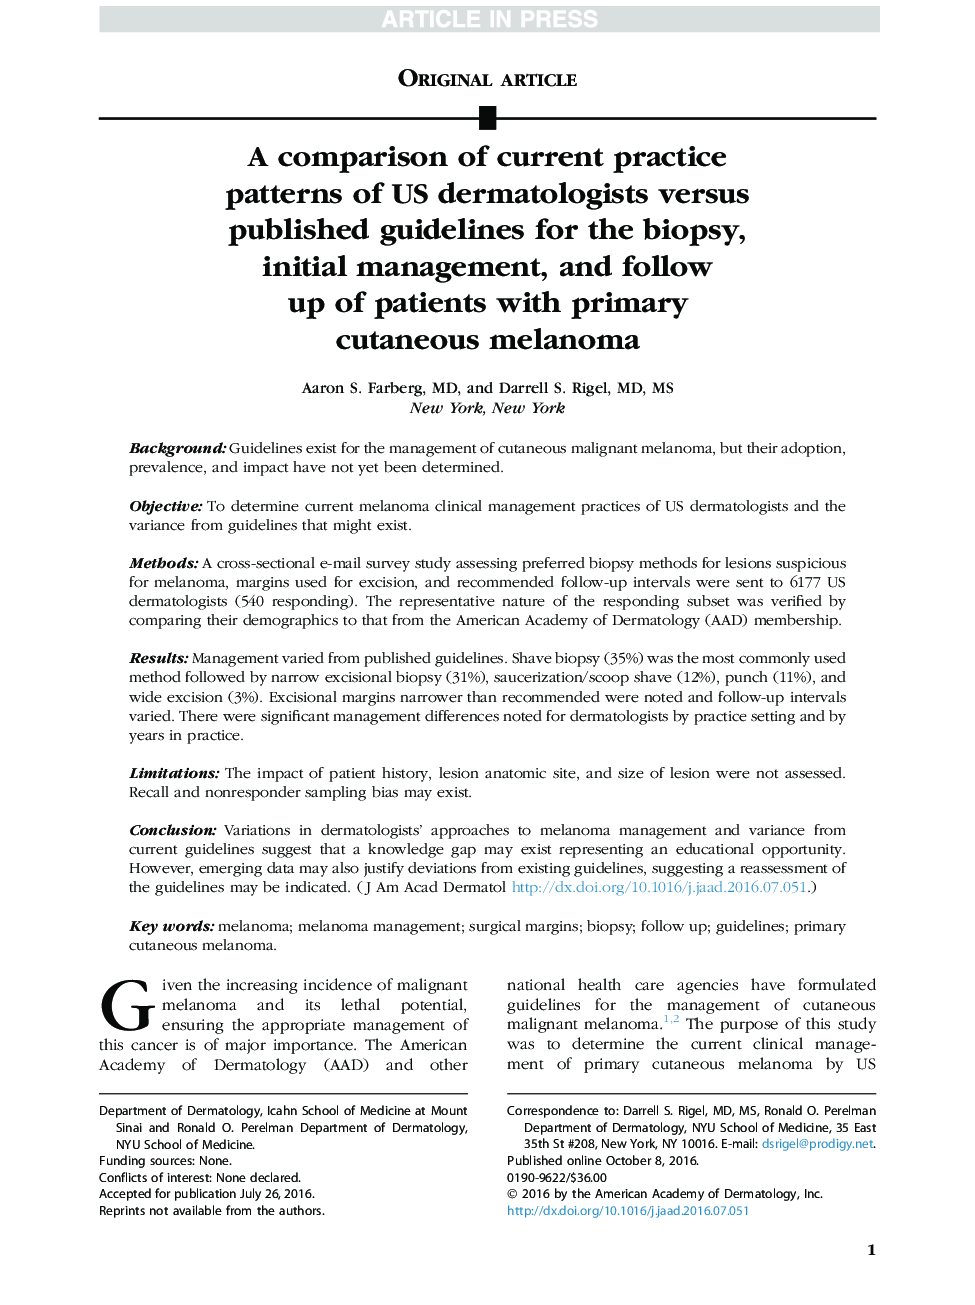 A comparison of current practice patterns of US dermatologists versus published guidelines for the biopsy, initial management, and follow up of patients with primary cutaneous melanoma